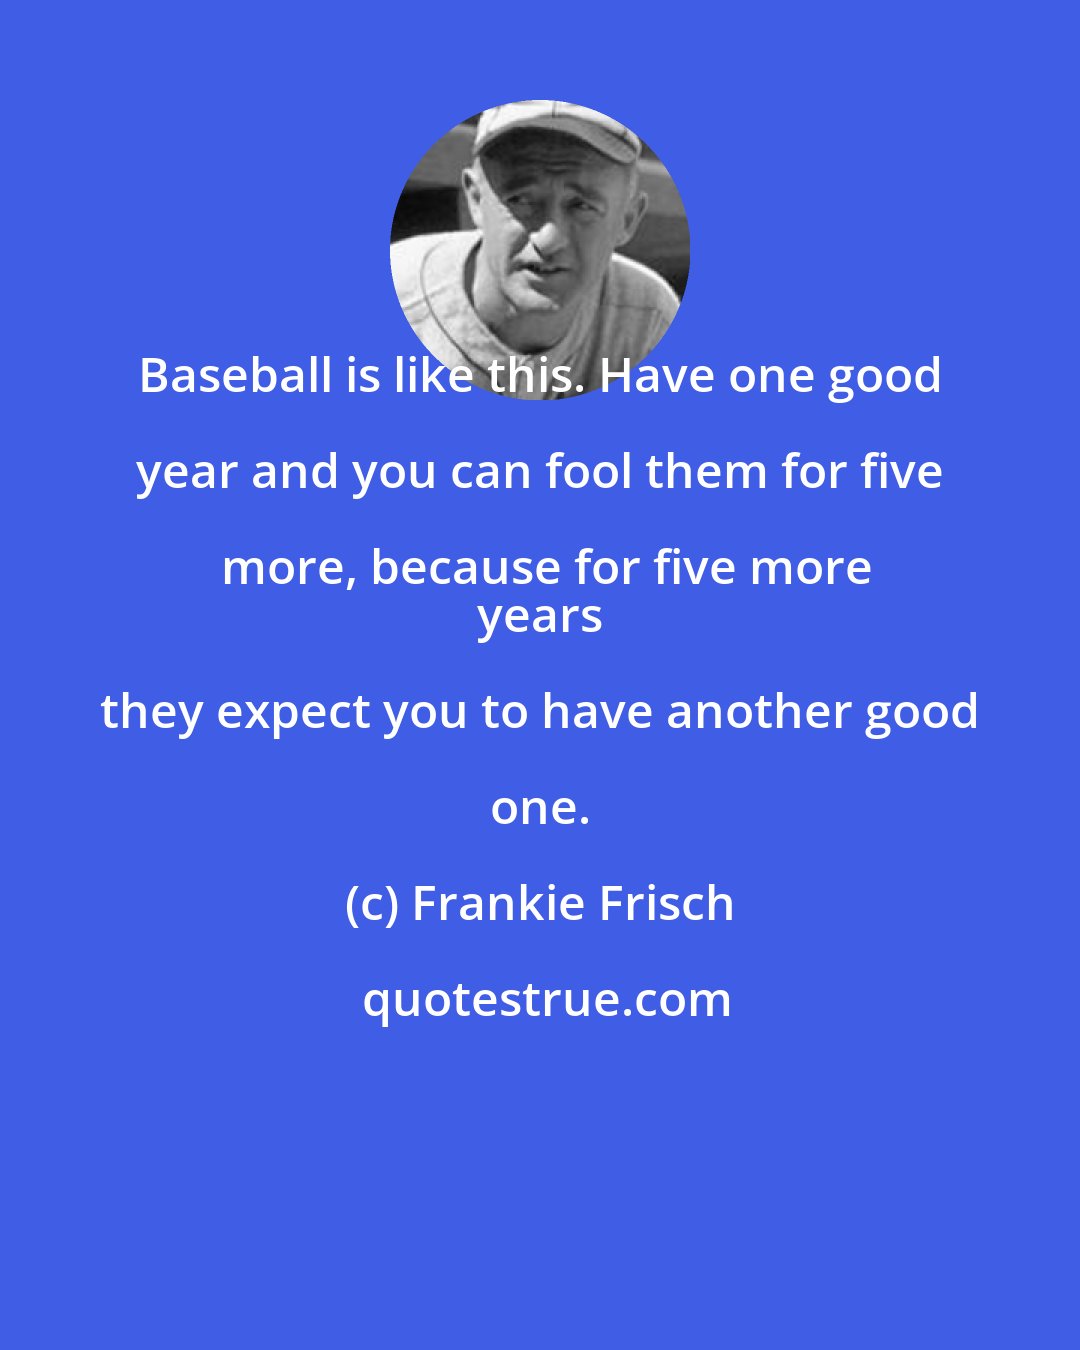 Frankie Frisch: Baseball is like this. Have one good year and you can fool them for five more, because for five more
 years they expect you to have another good one.